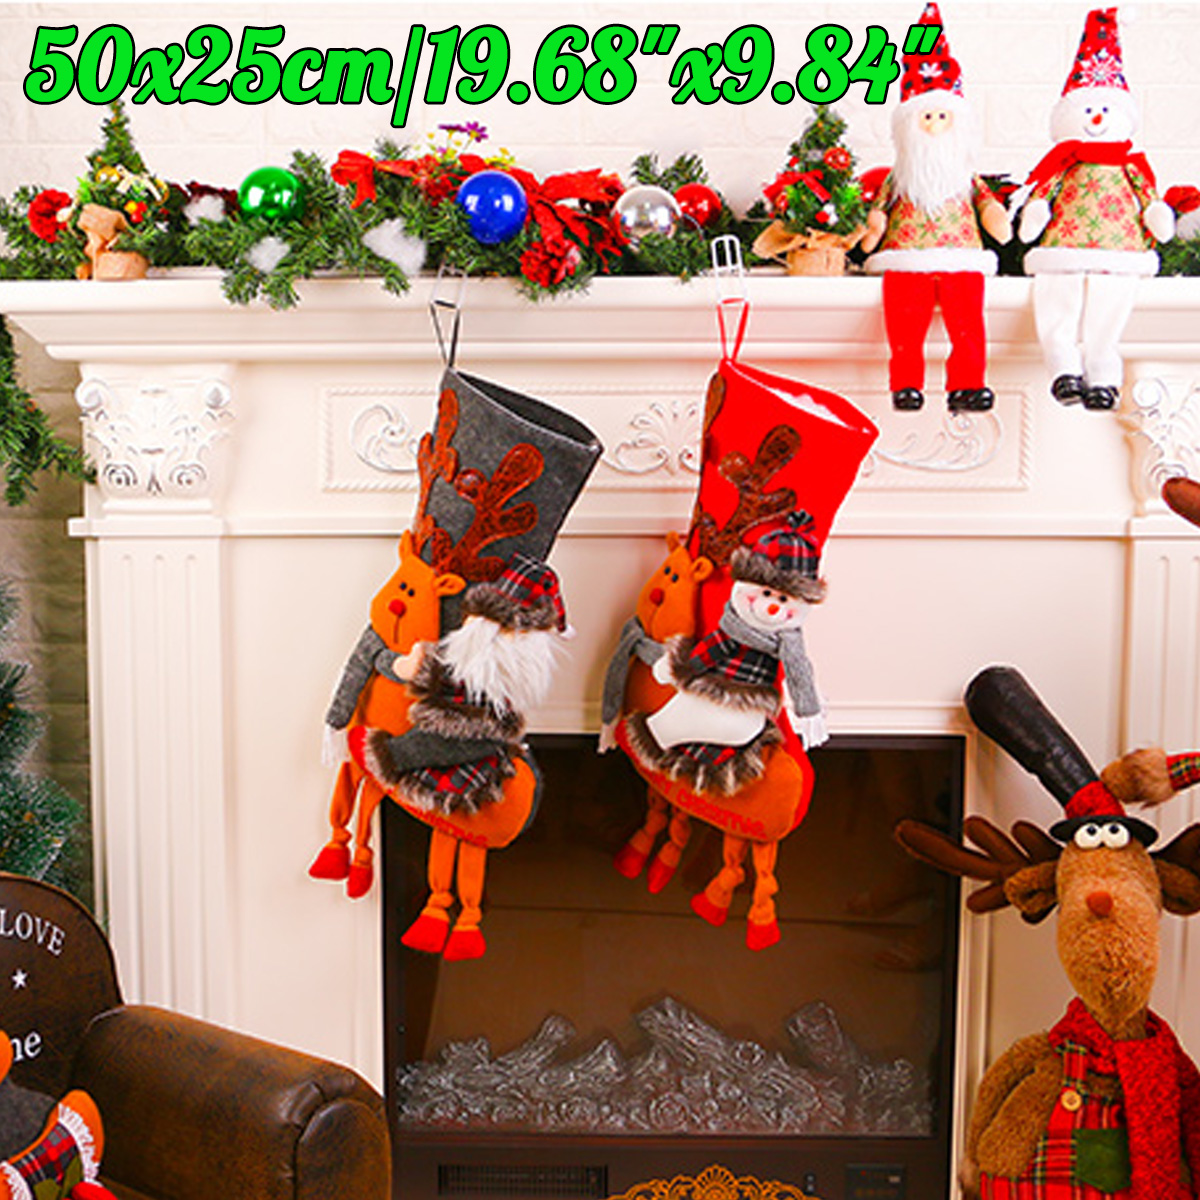 50cm-Christmas-Stocking-3D-Snowman-Decoration-Hanging-Sock-Gift-Bag-Party-Decor-1370469-1